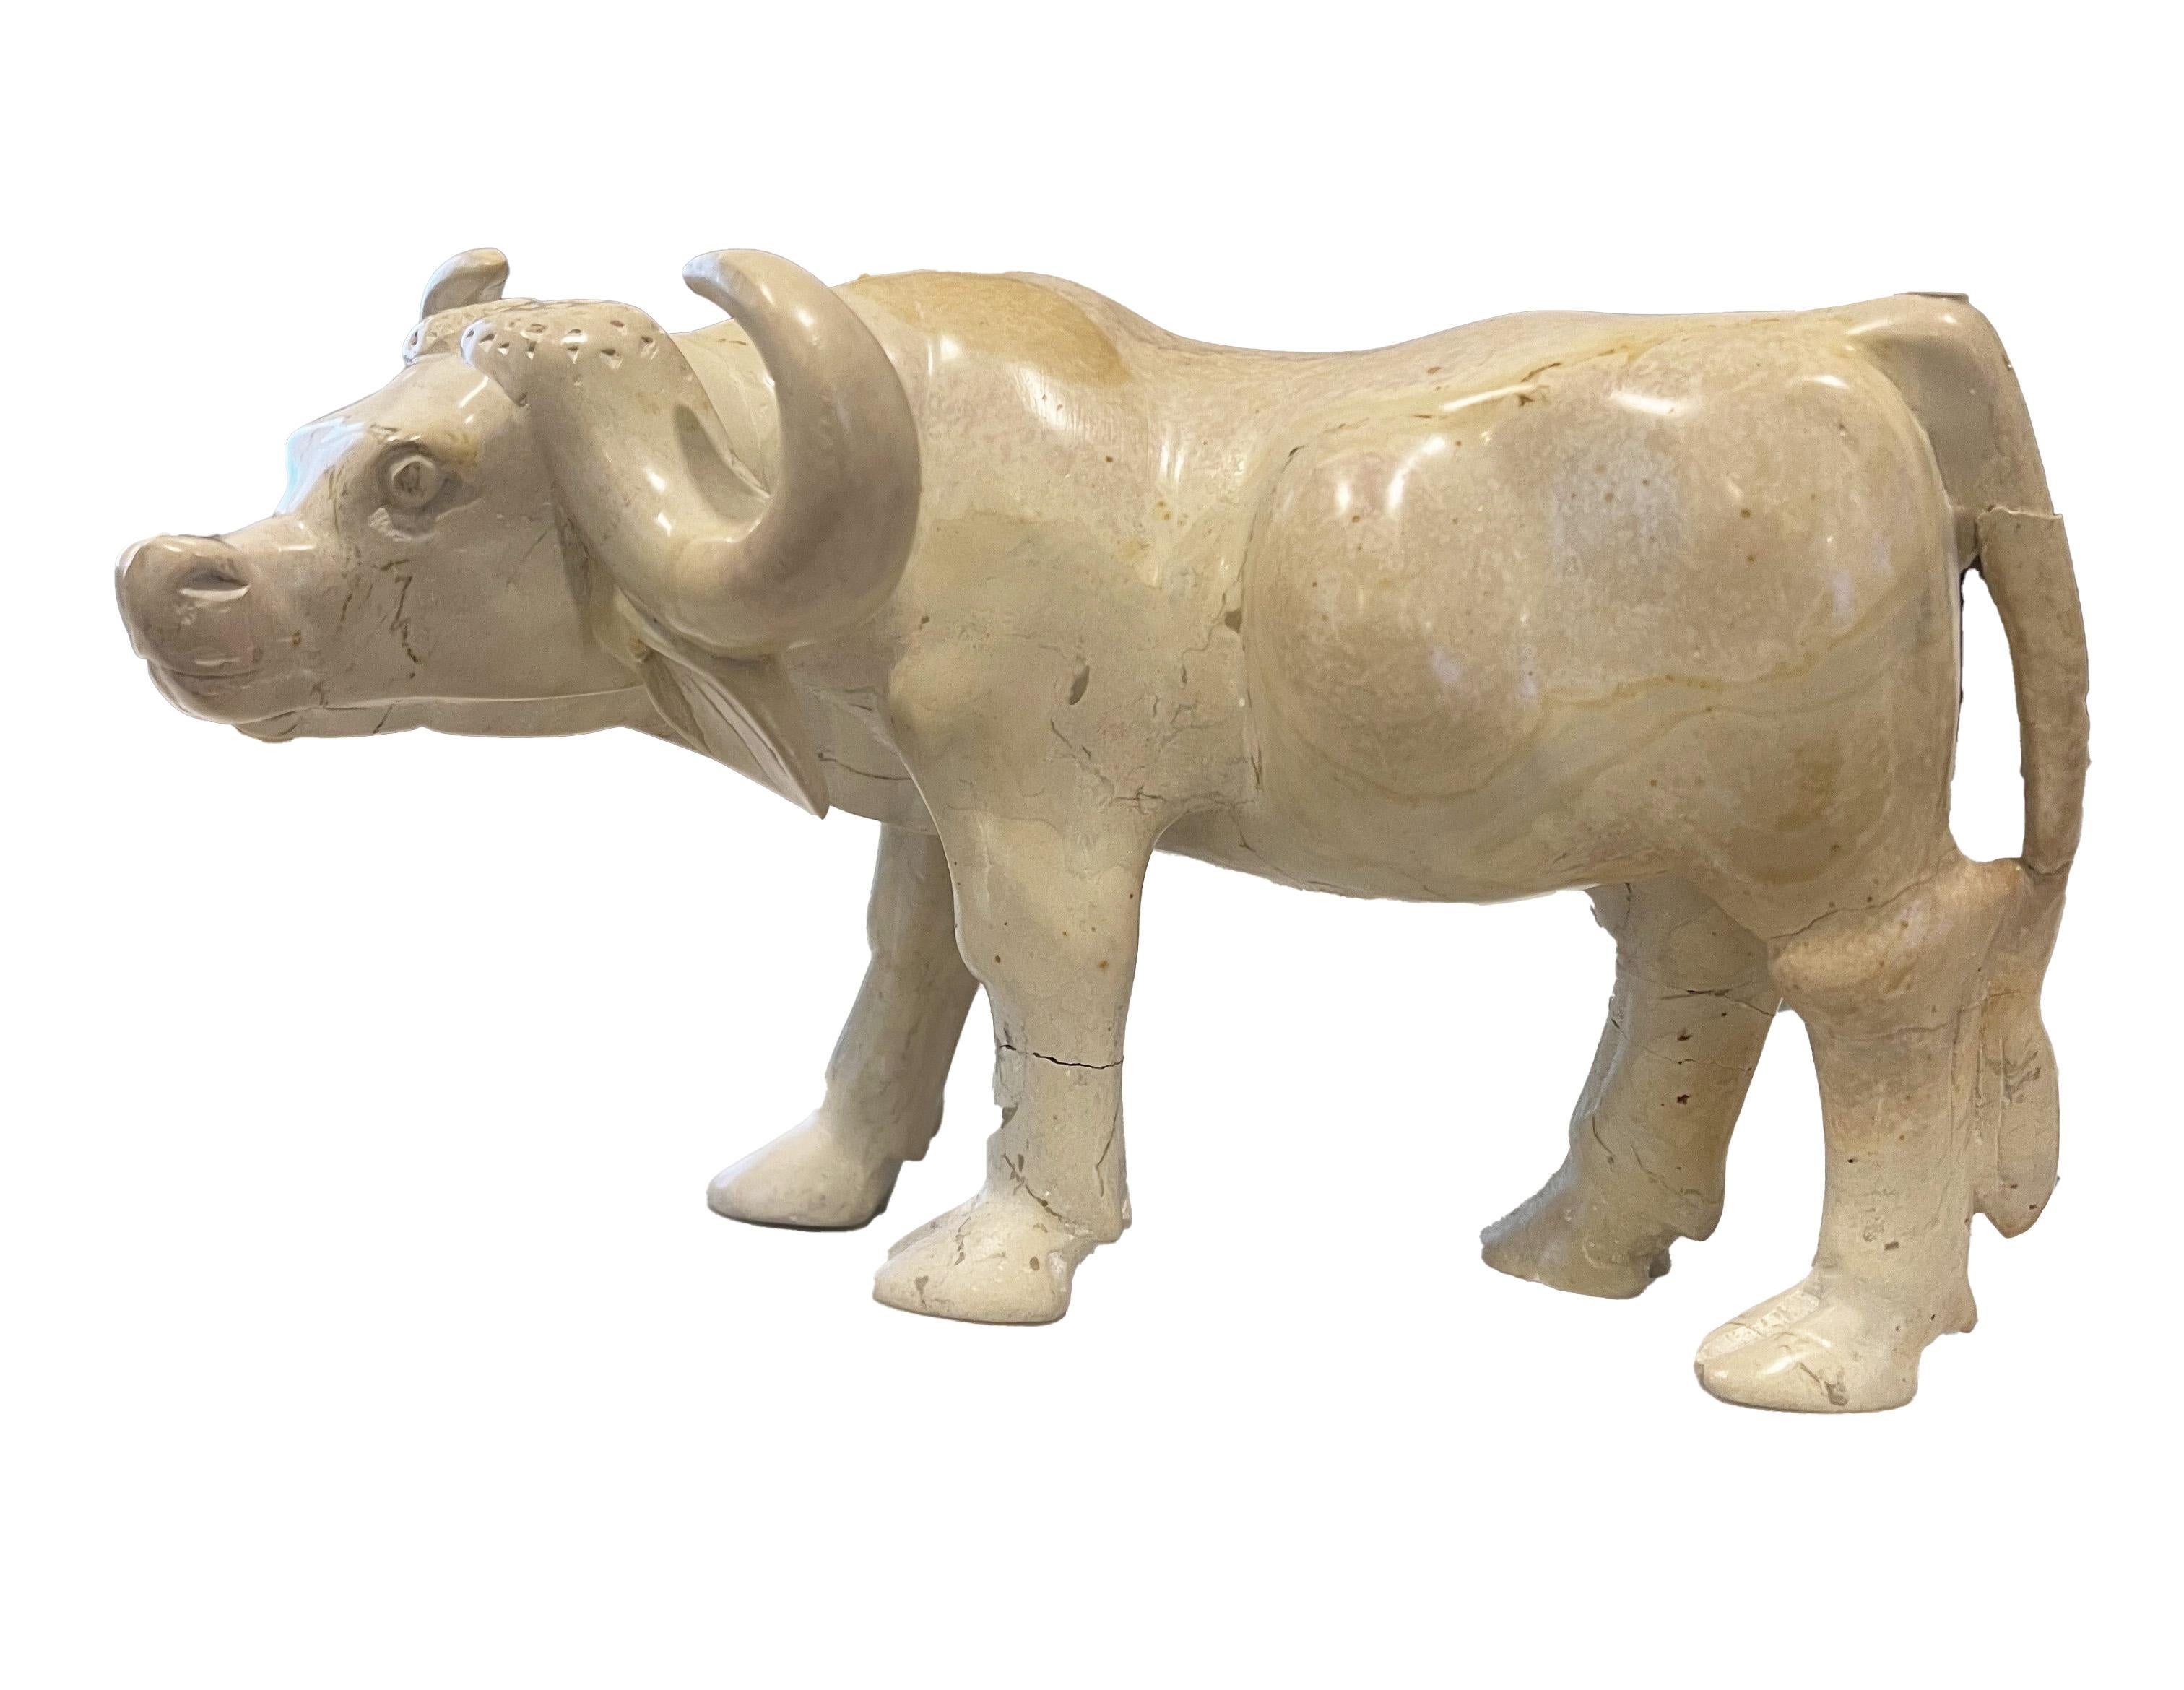 A found soapstone cattle statue, hailing from the heart of Kenya. Each curve and contour of this exquisite piece has been meticulously carved, showcasing the artisan's skill and attention to detail. Particularly remarkable are the realistic details